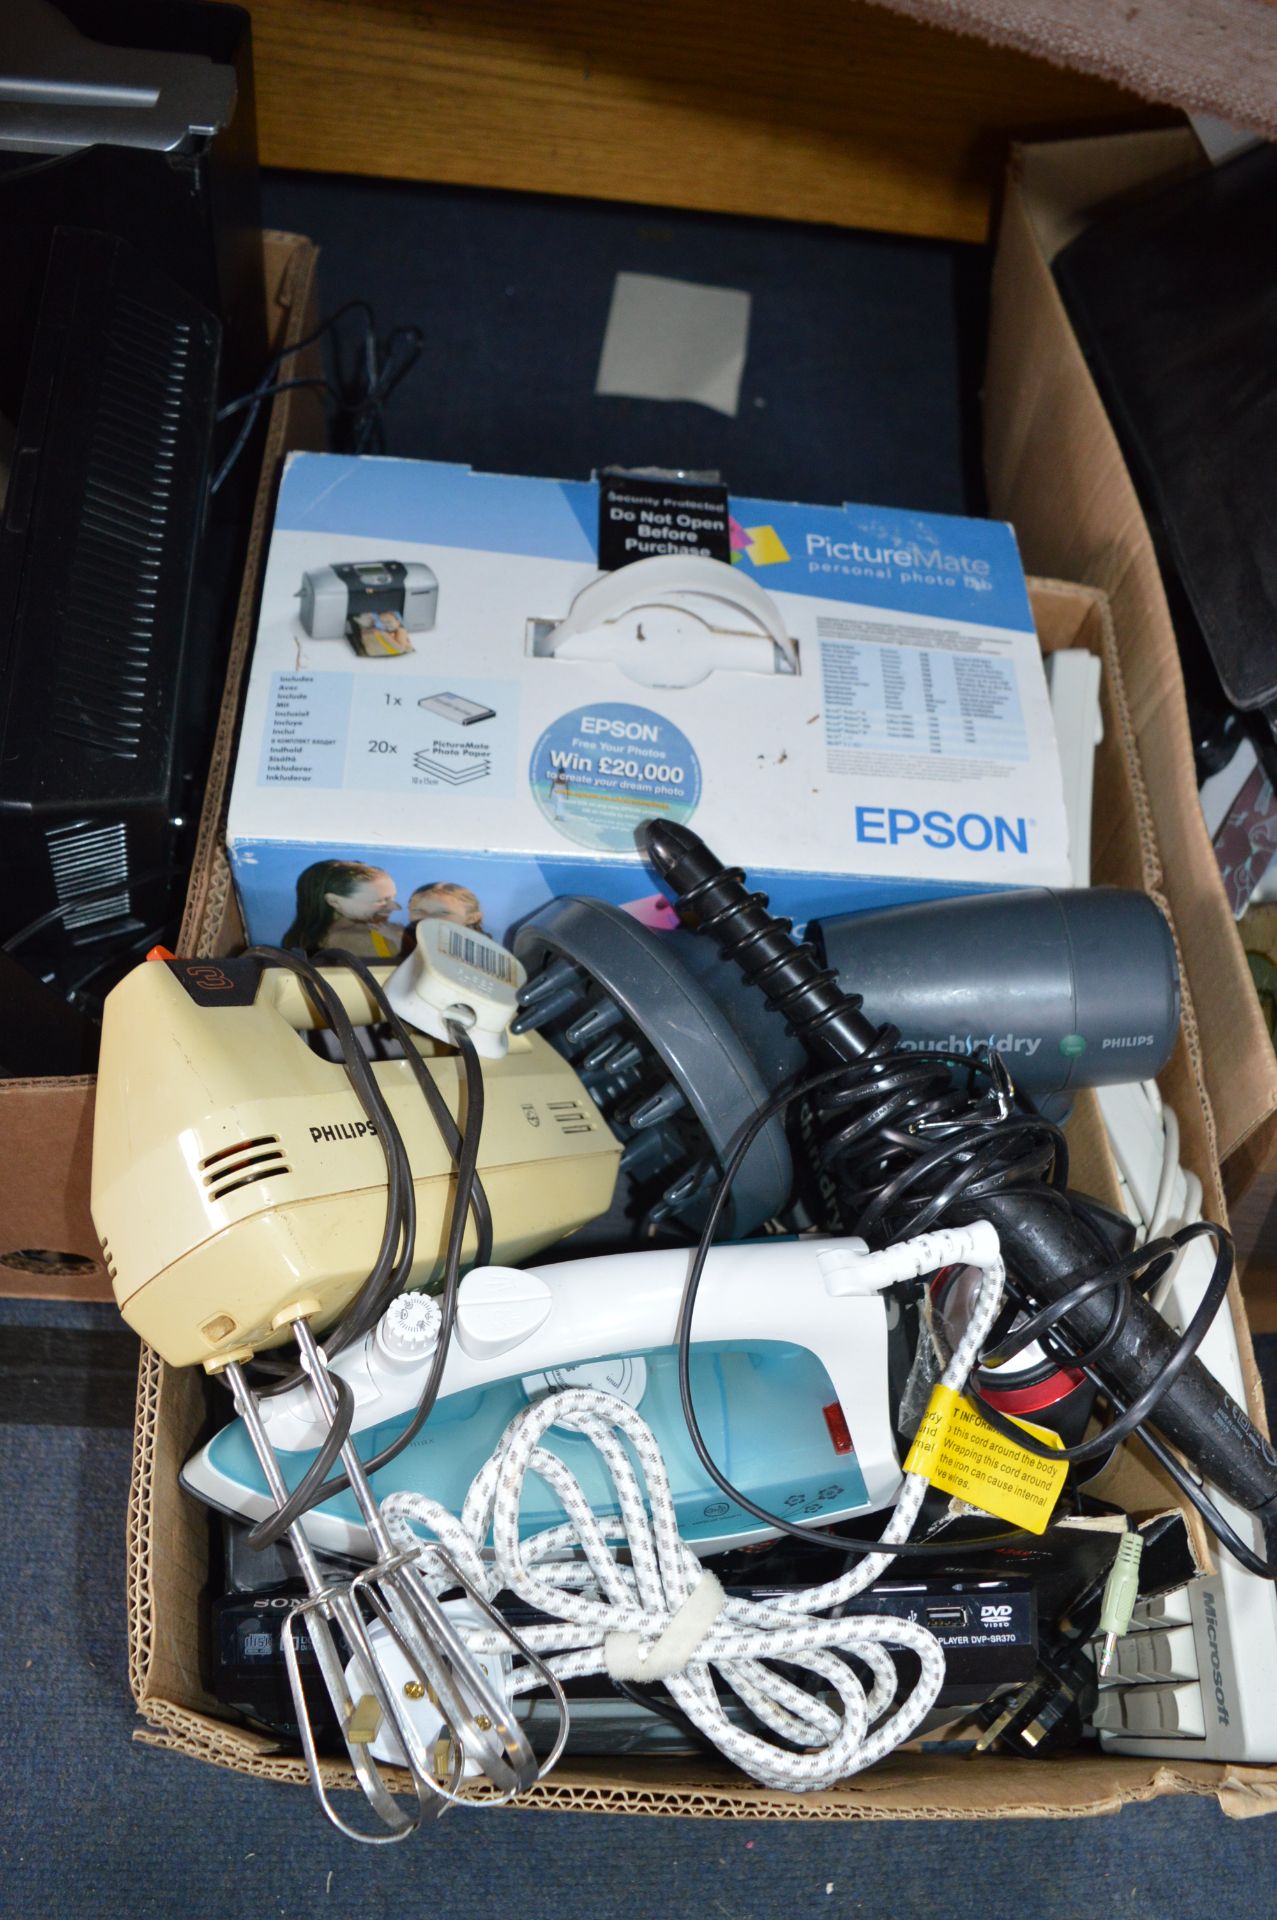 Electrical Items; Steam Iron, Hair Dryers, etc.